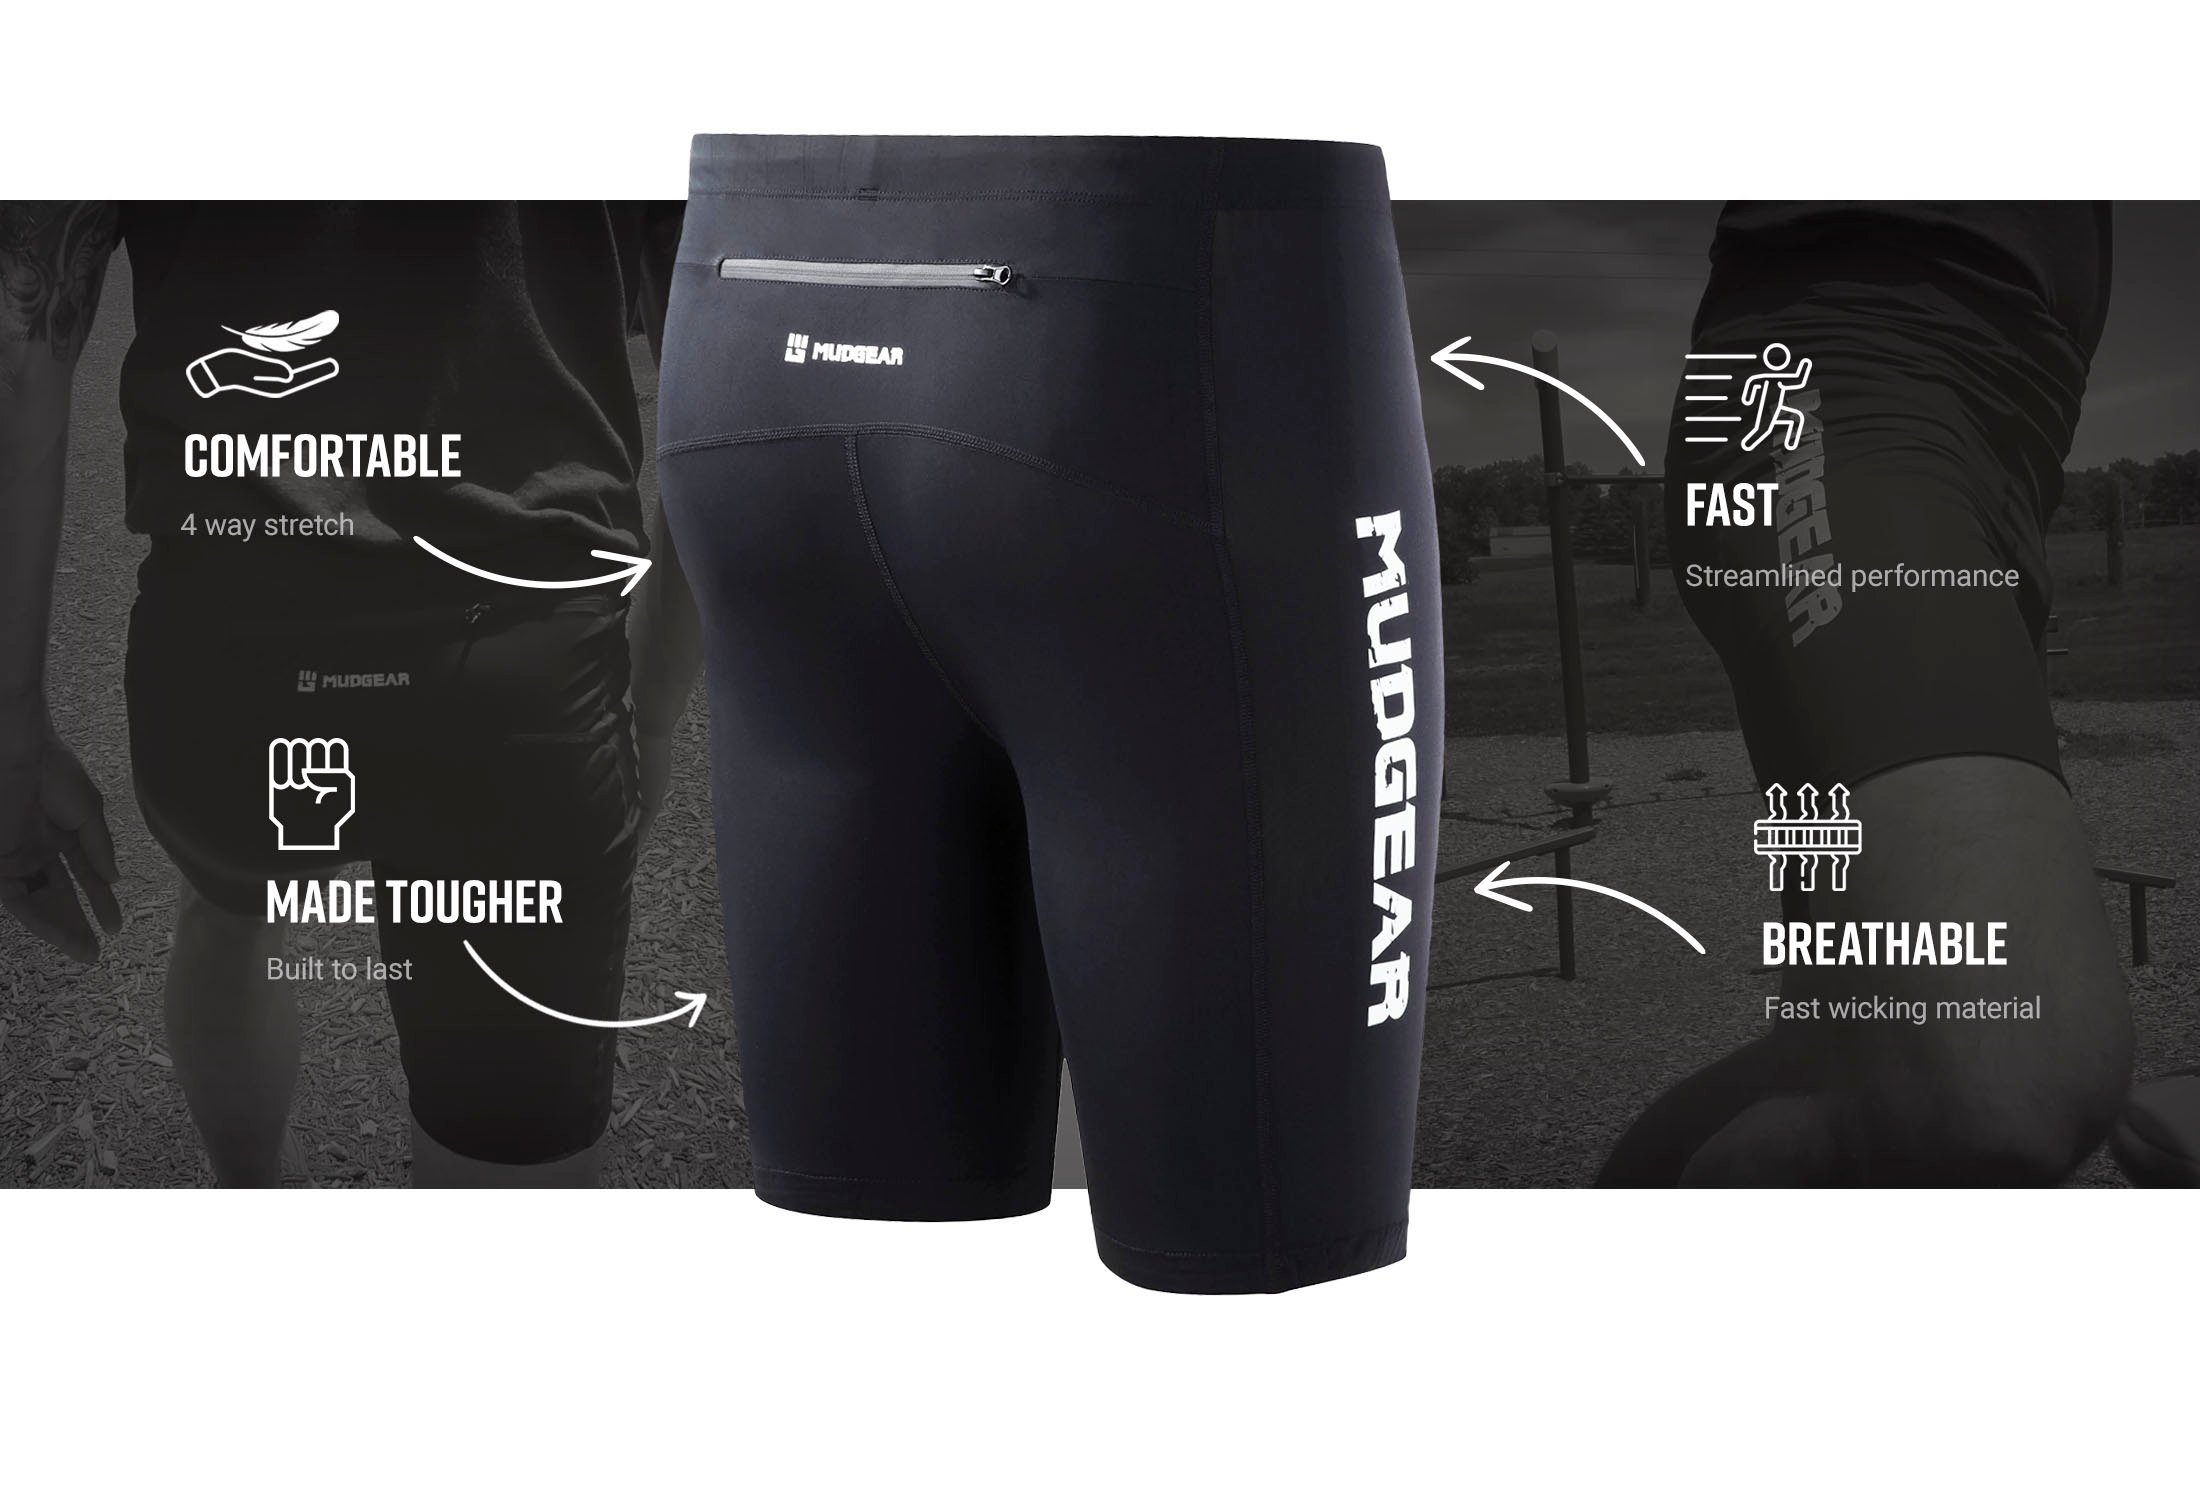  MudGear Compression Shorts - Mens Athletic Shorts for